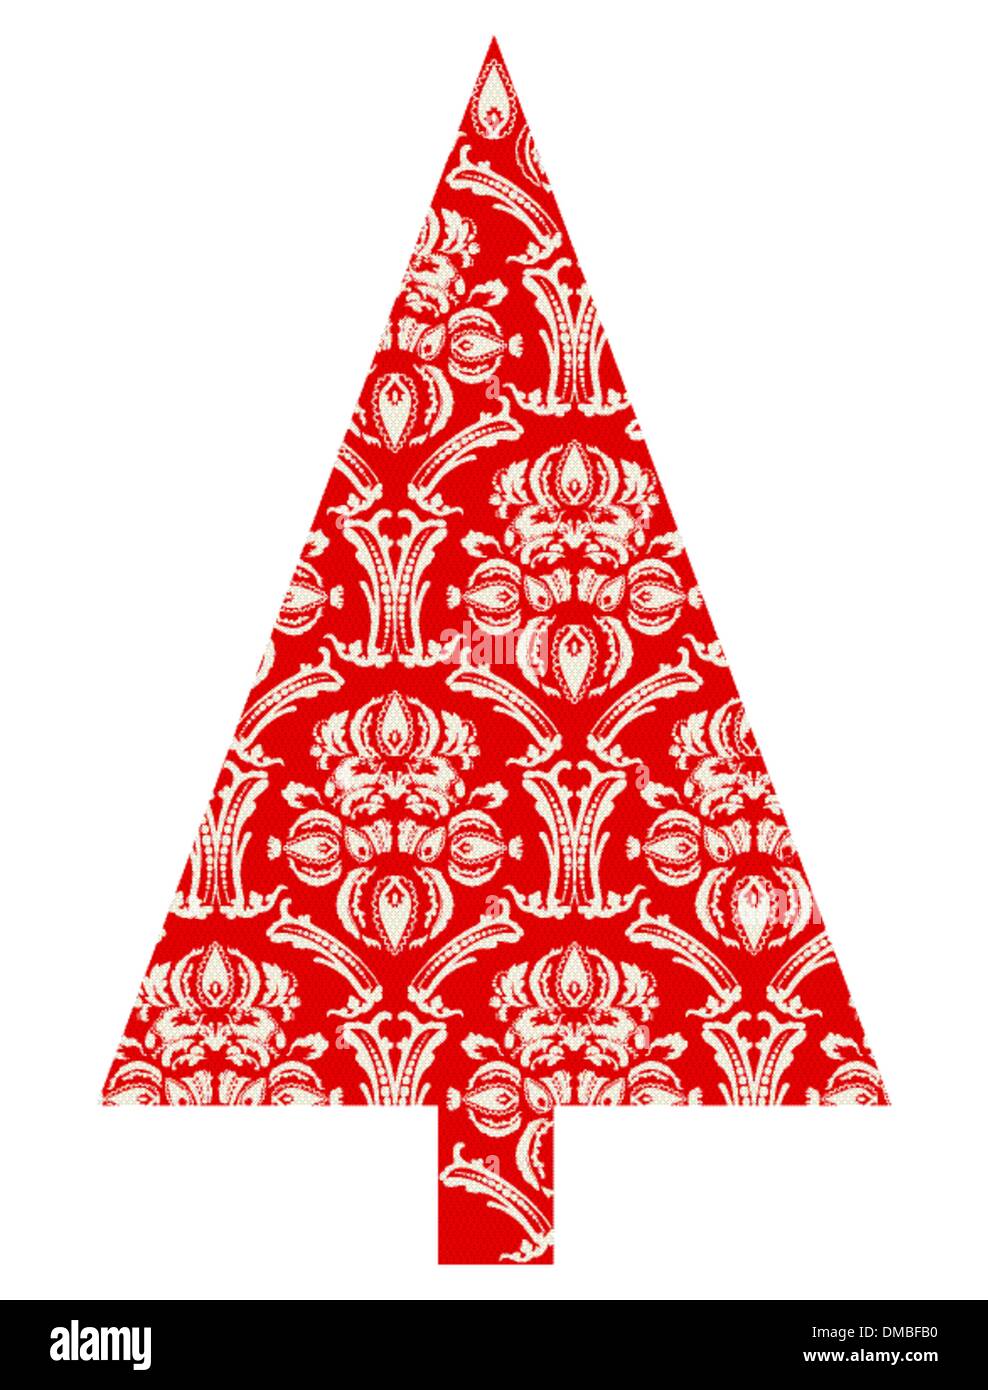 Christmas tree with red pattern Stock Vector